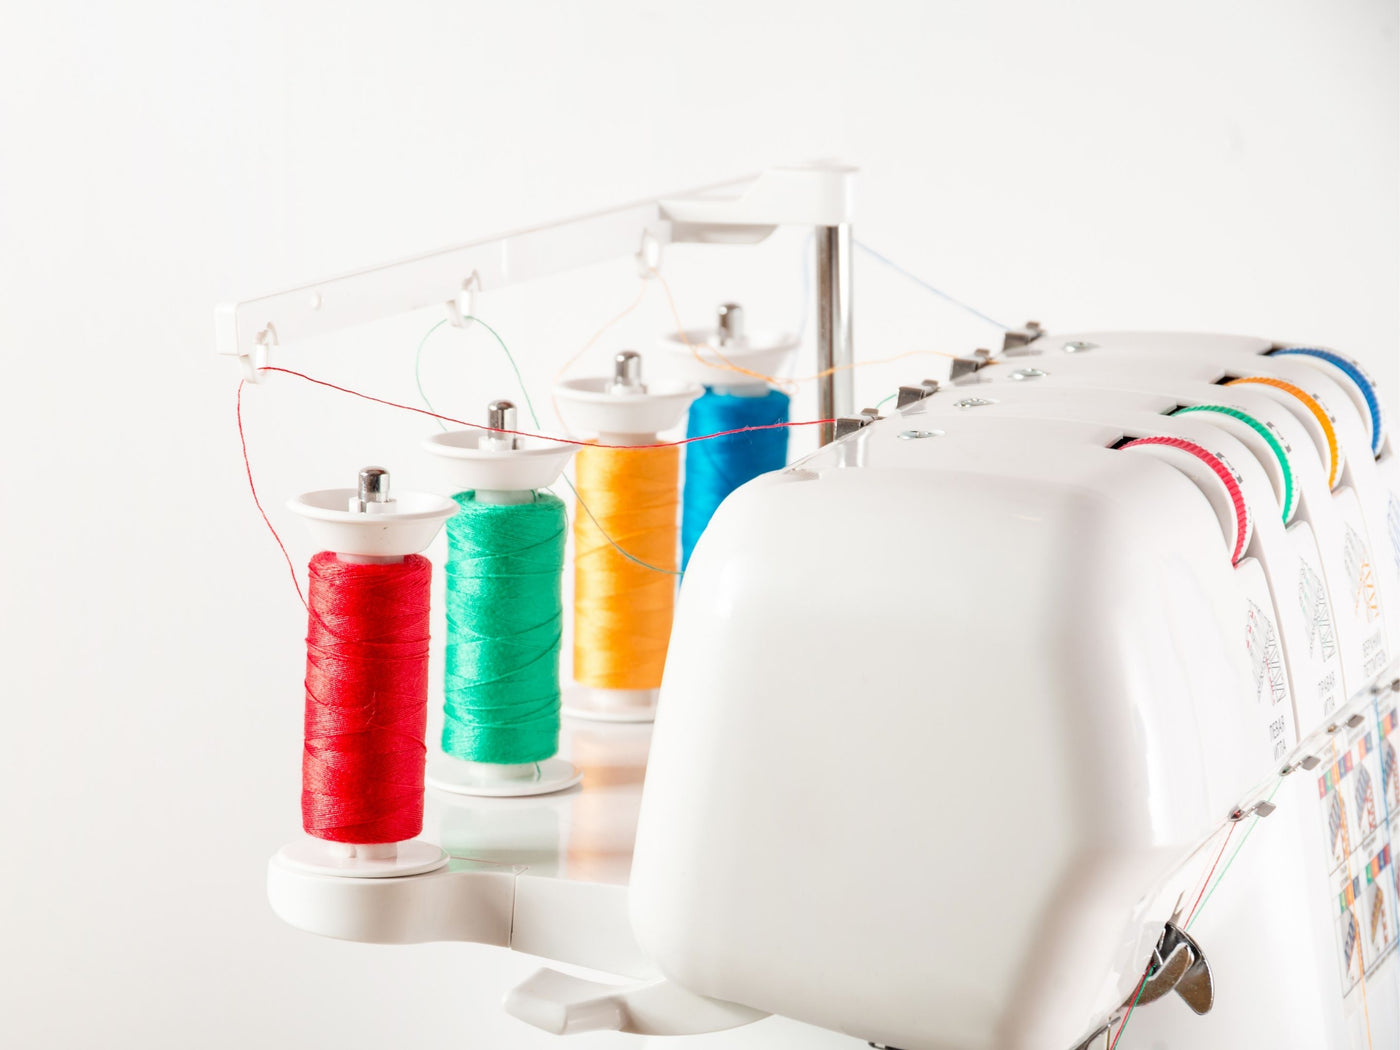 Serger Sewing Machine Threaded with Colorful Thread